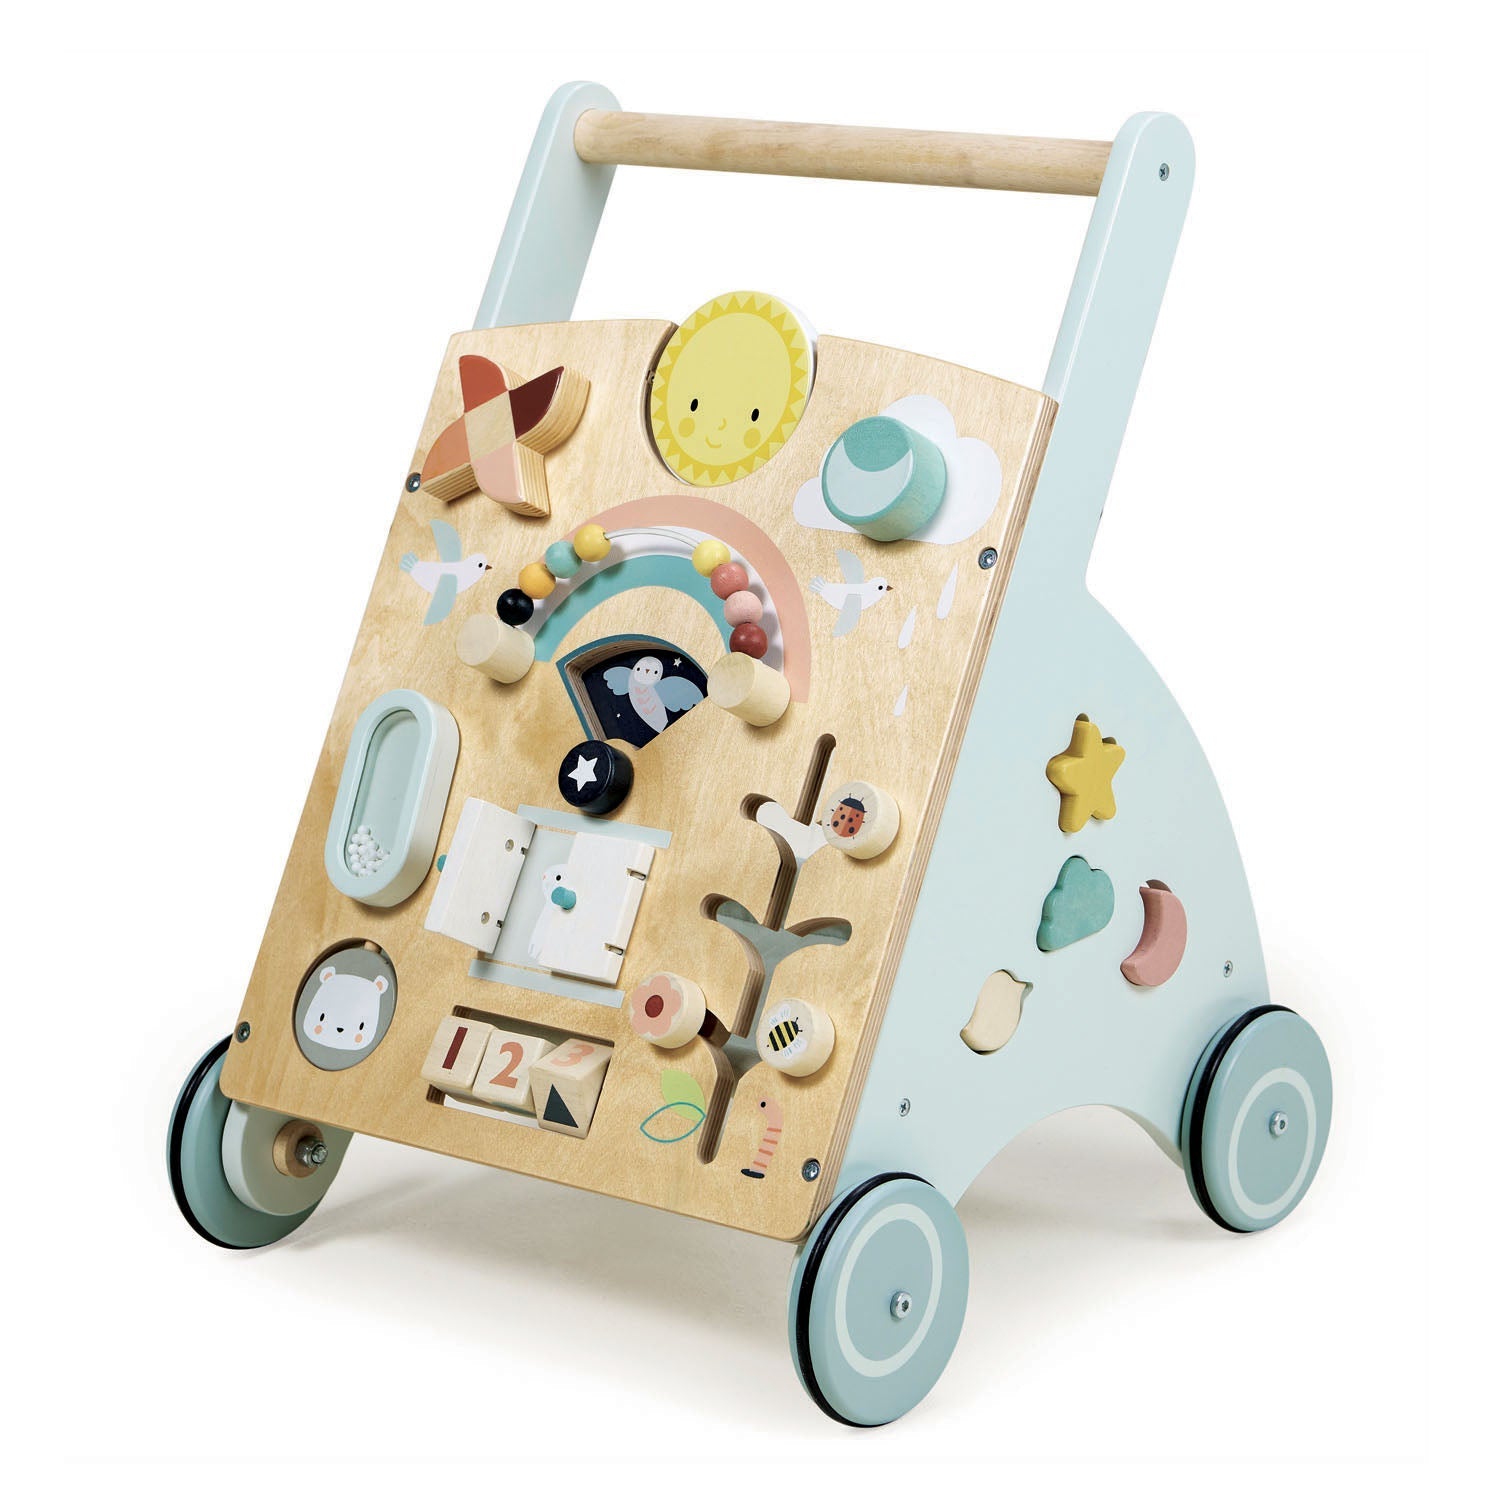 Tender Leaf Toys Sunshine Baby Activity Walker - A stylish and interactive toddler walker with weather-inspired features, promoting confidence, motor skill development, and offering storage with a fabric canopy.